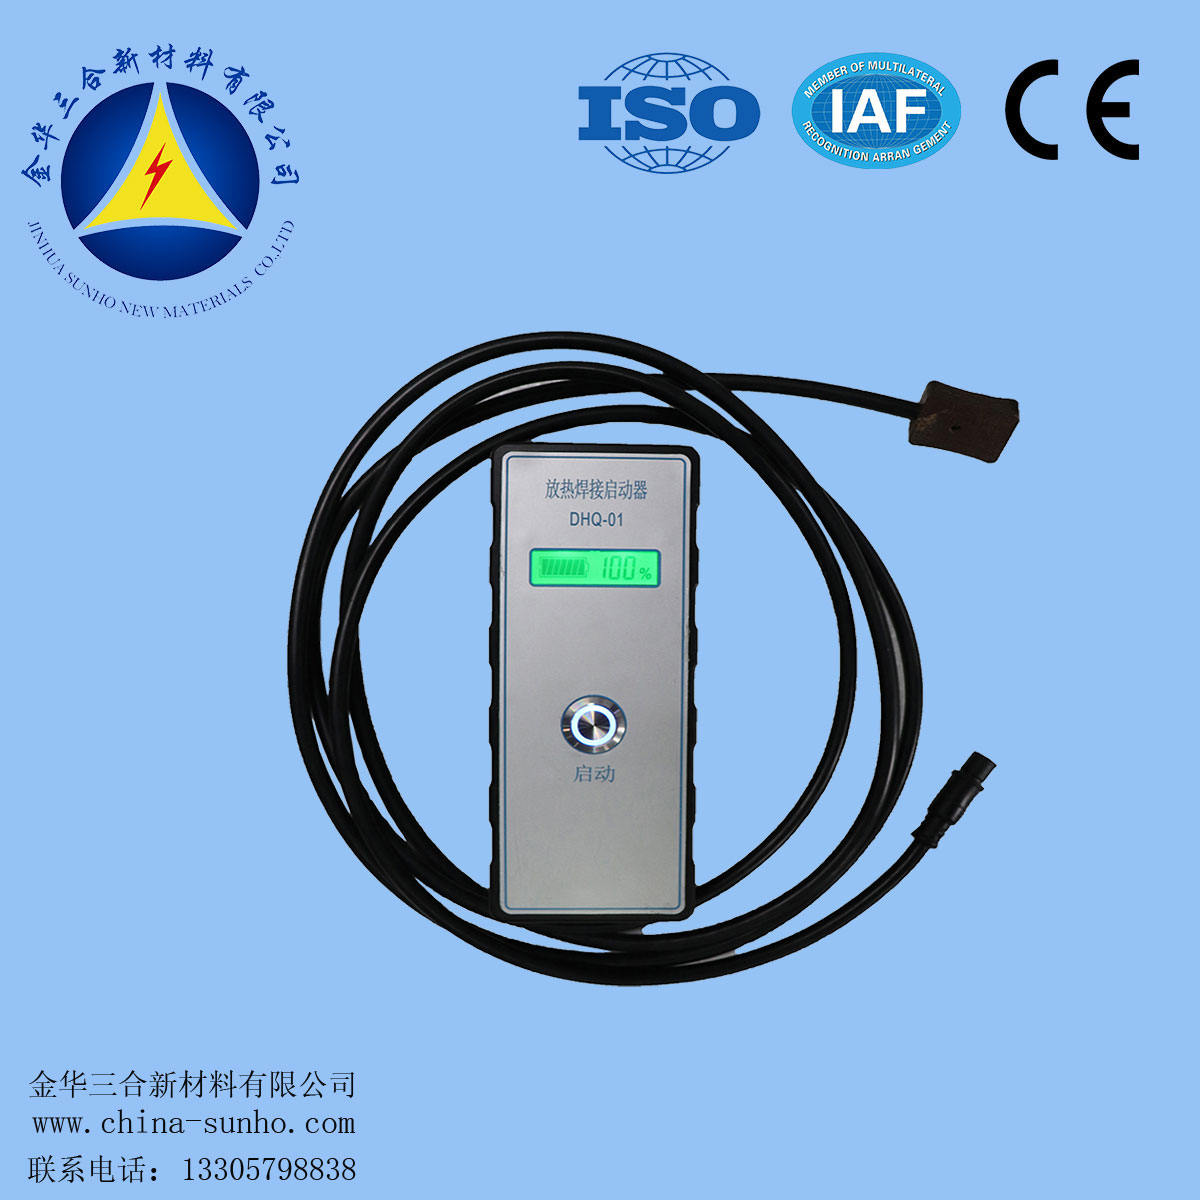 Our company successfully developed an exothermic welding electronic igniter